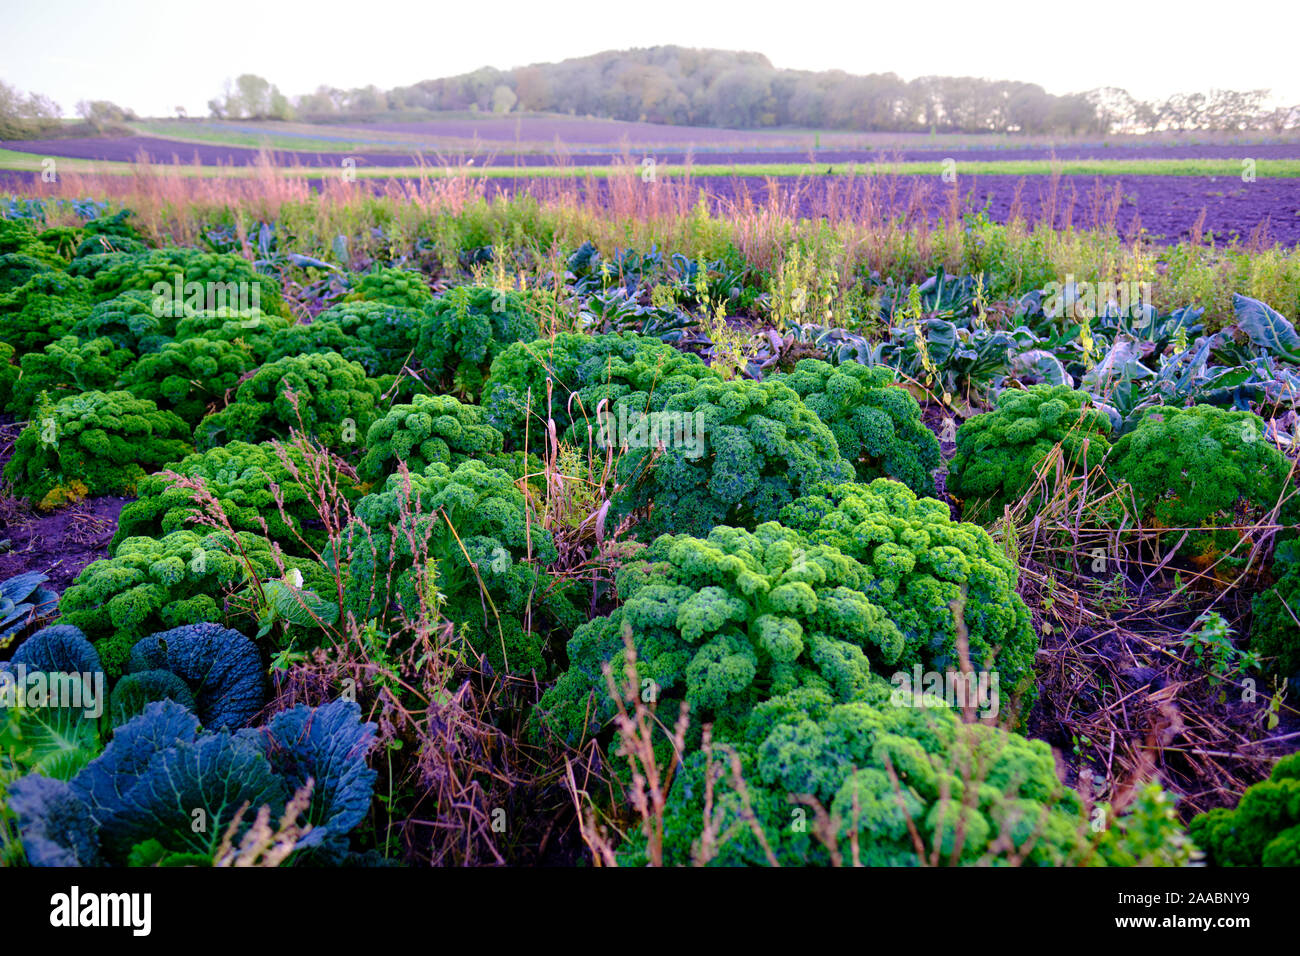 Kale plant in a non industrial, organic garden, in fron of a blurred nature background with colorful bokeh Stock Photo